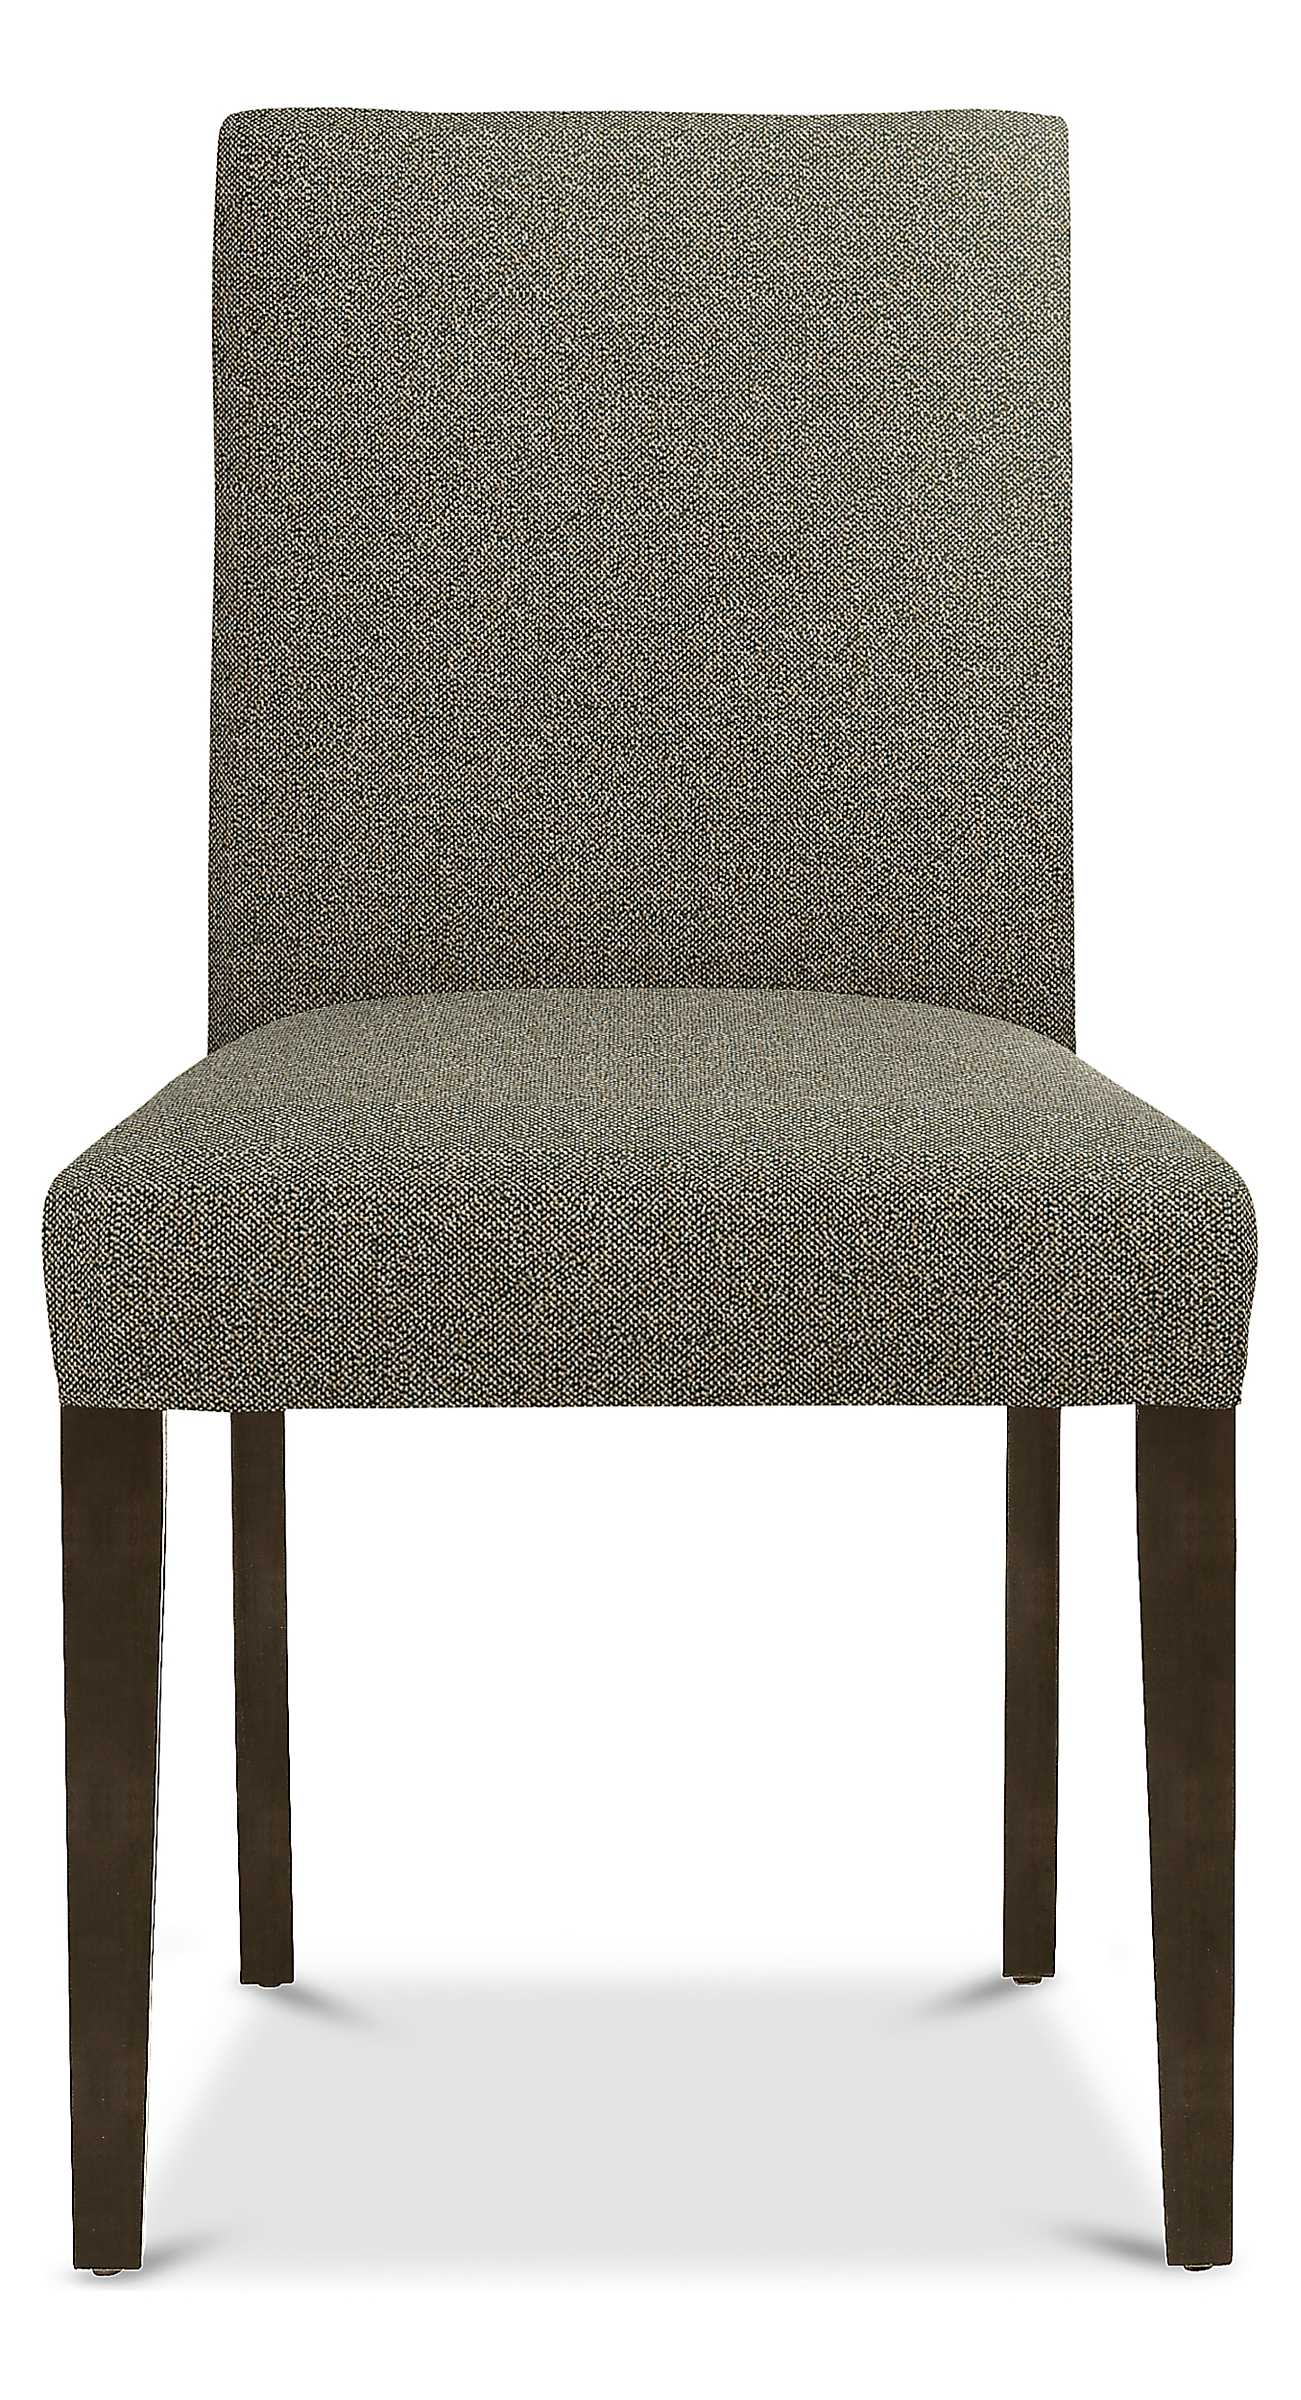 Front view of Peyton Side Chair in Tatum Fabric.